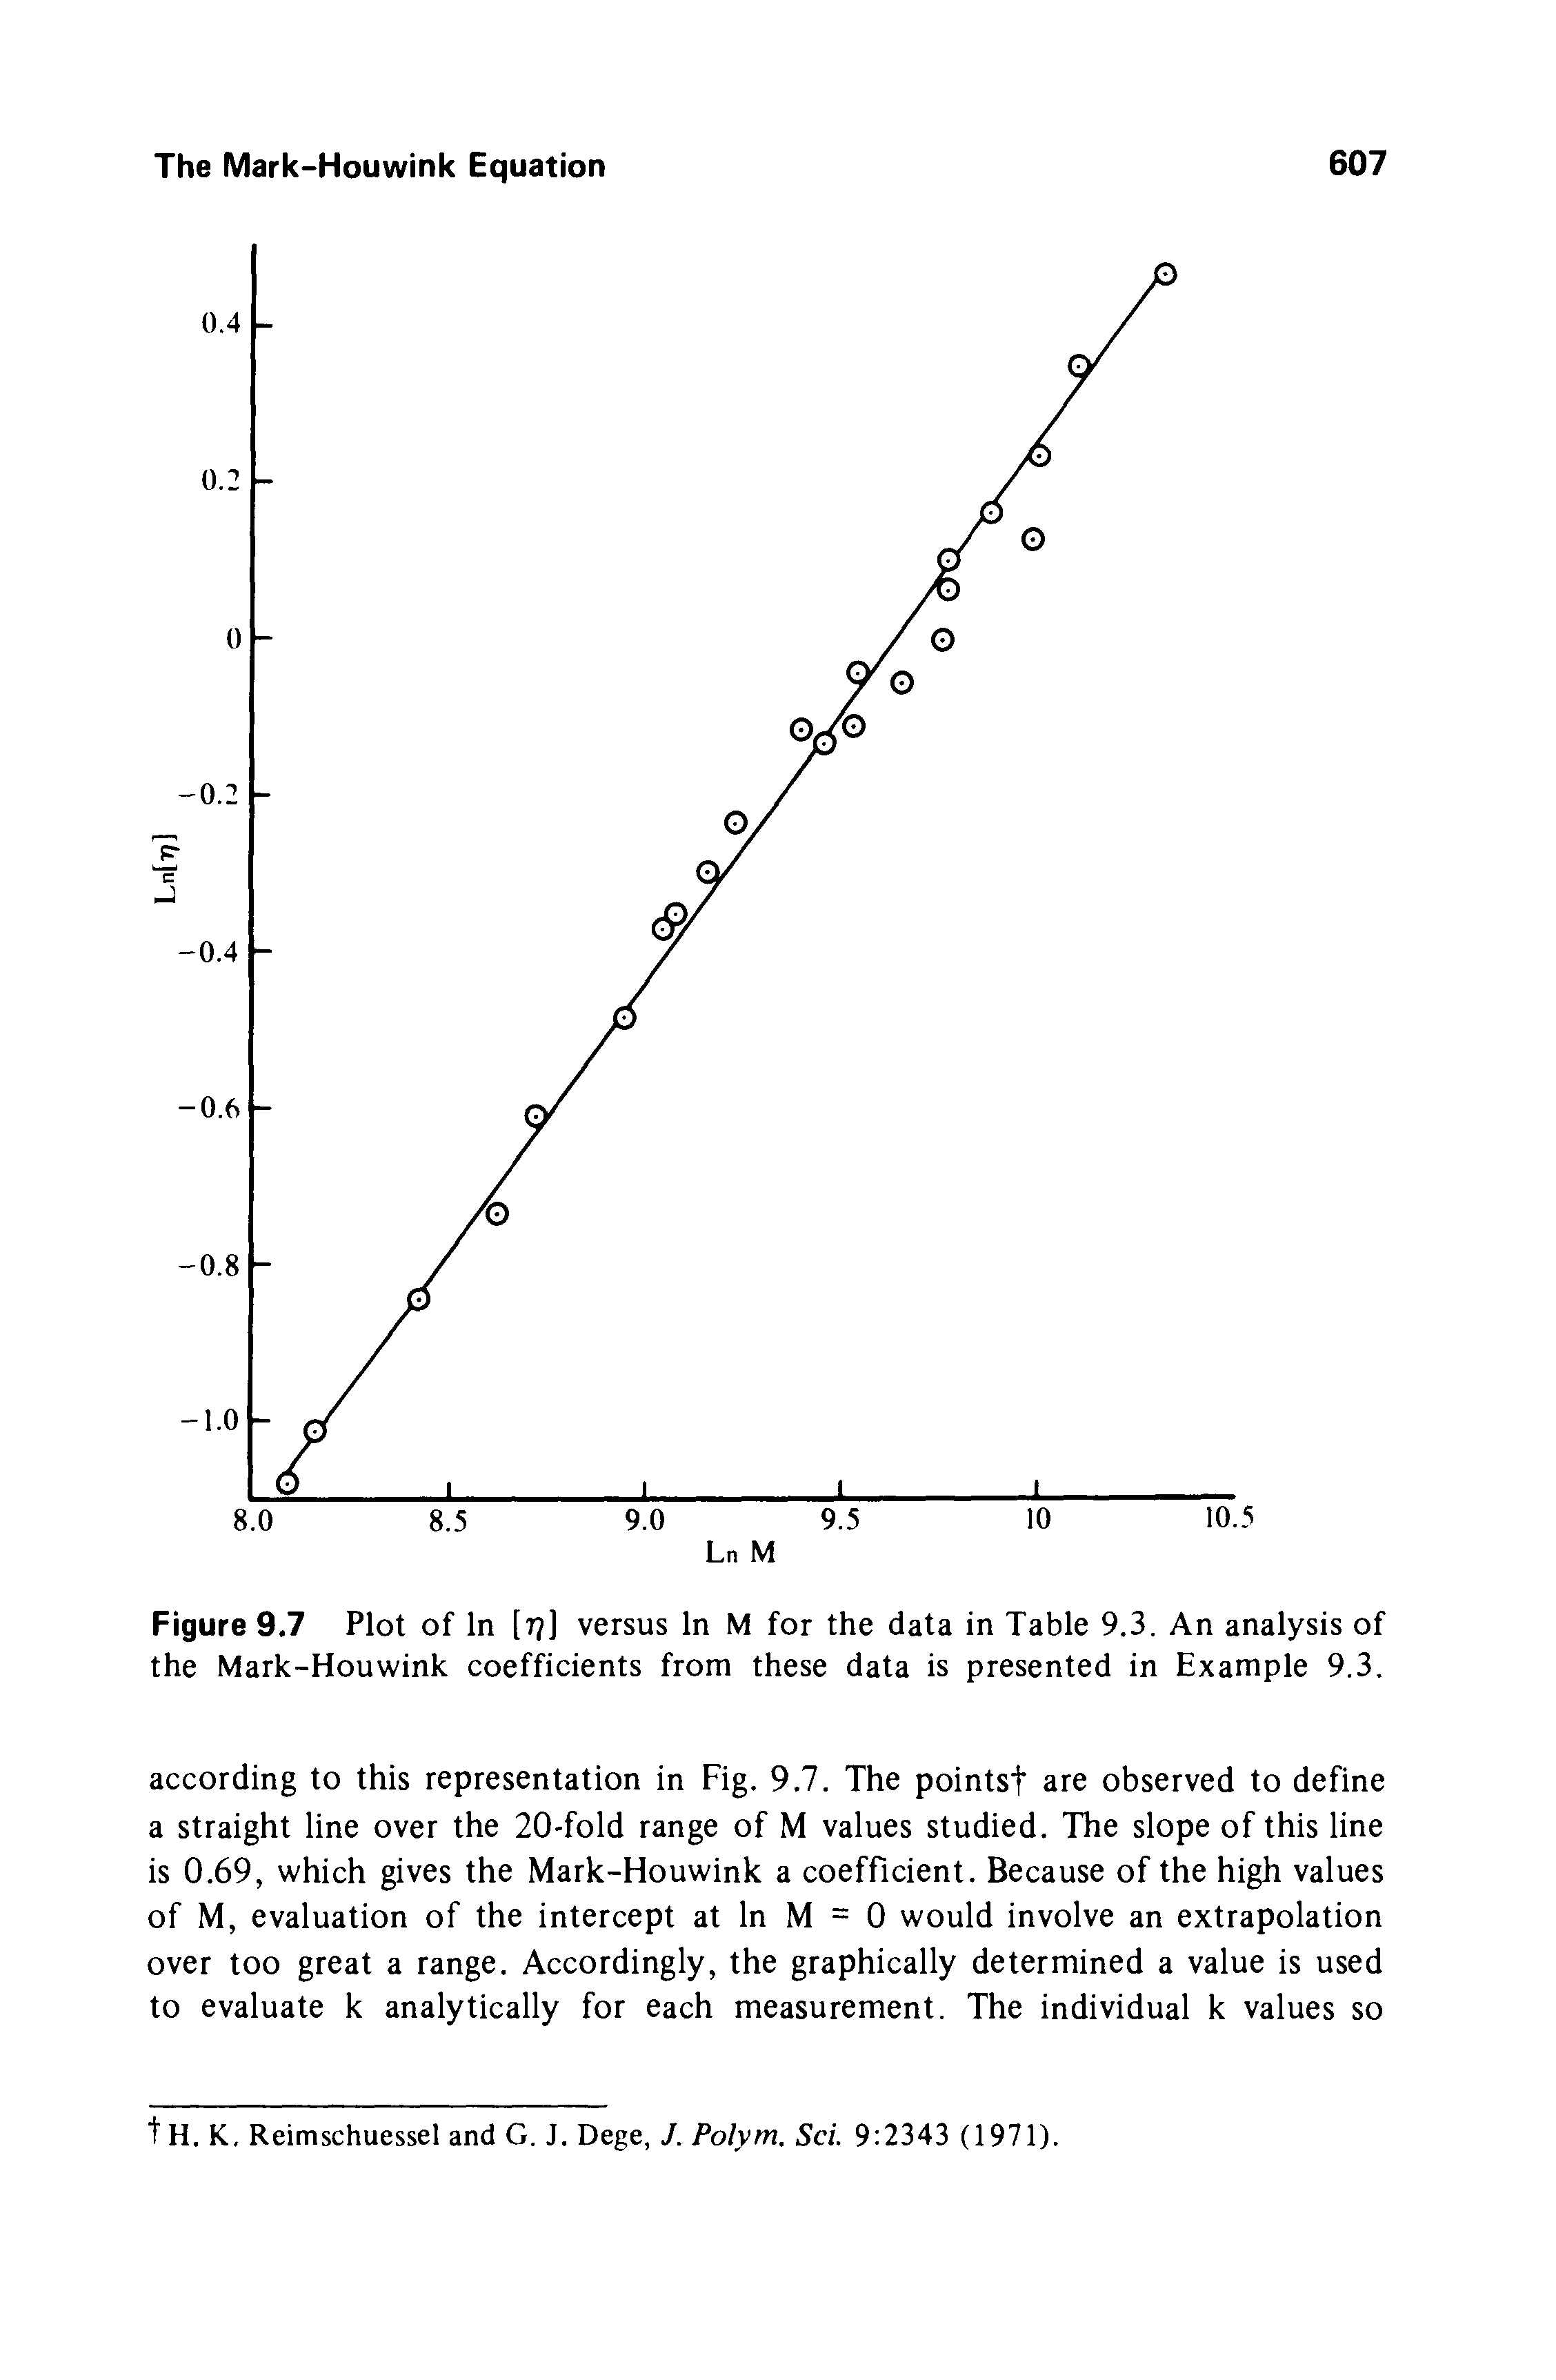 Figure 9.7 Plot of In [r ] versus In M for the data in Table 9.3. An analysis of the Mark-Houwink coefficients from these data is presented in Example 9.3.